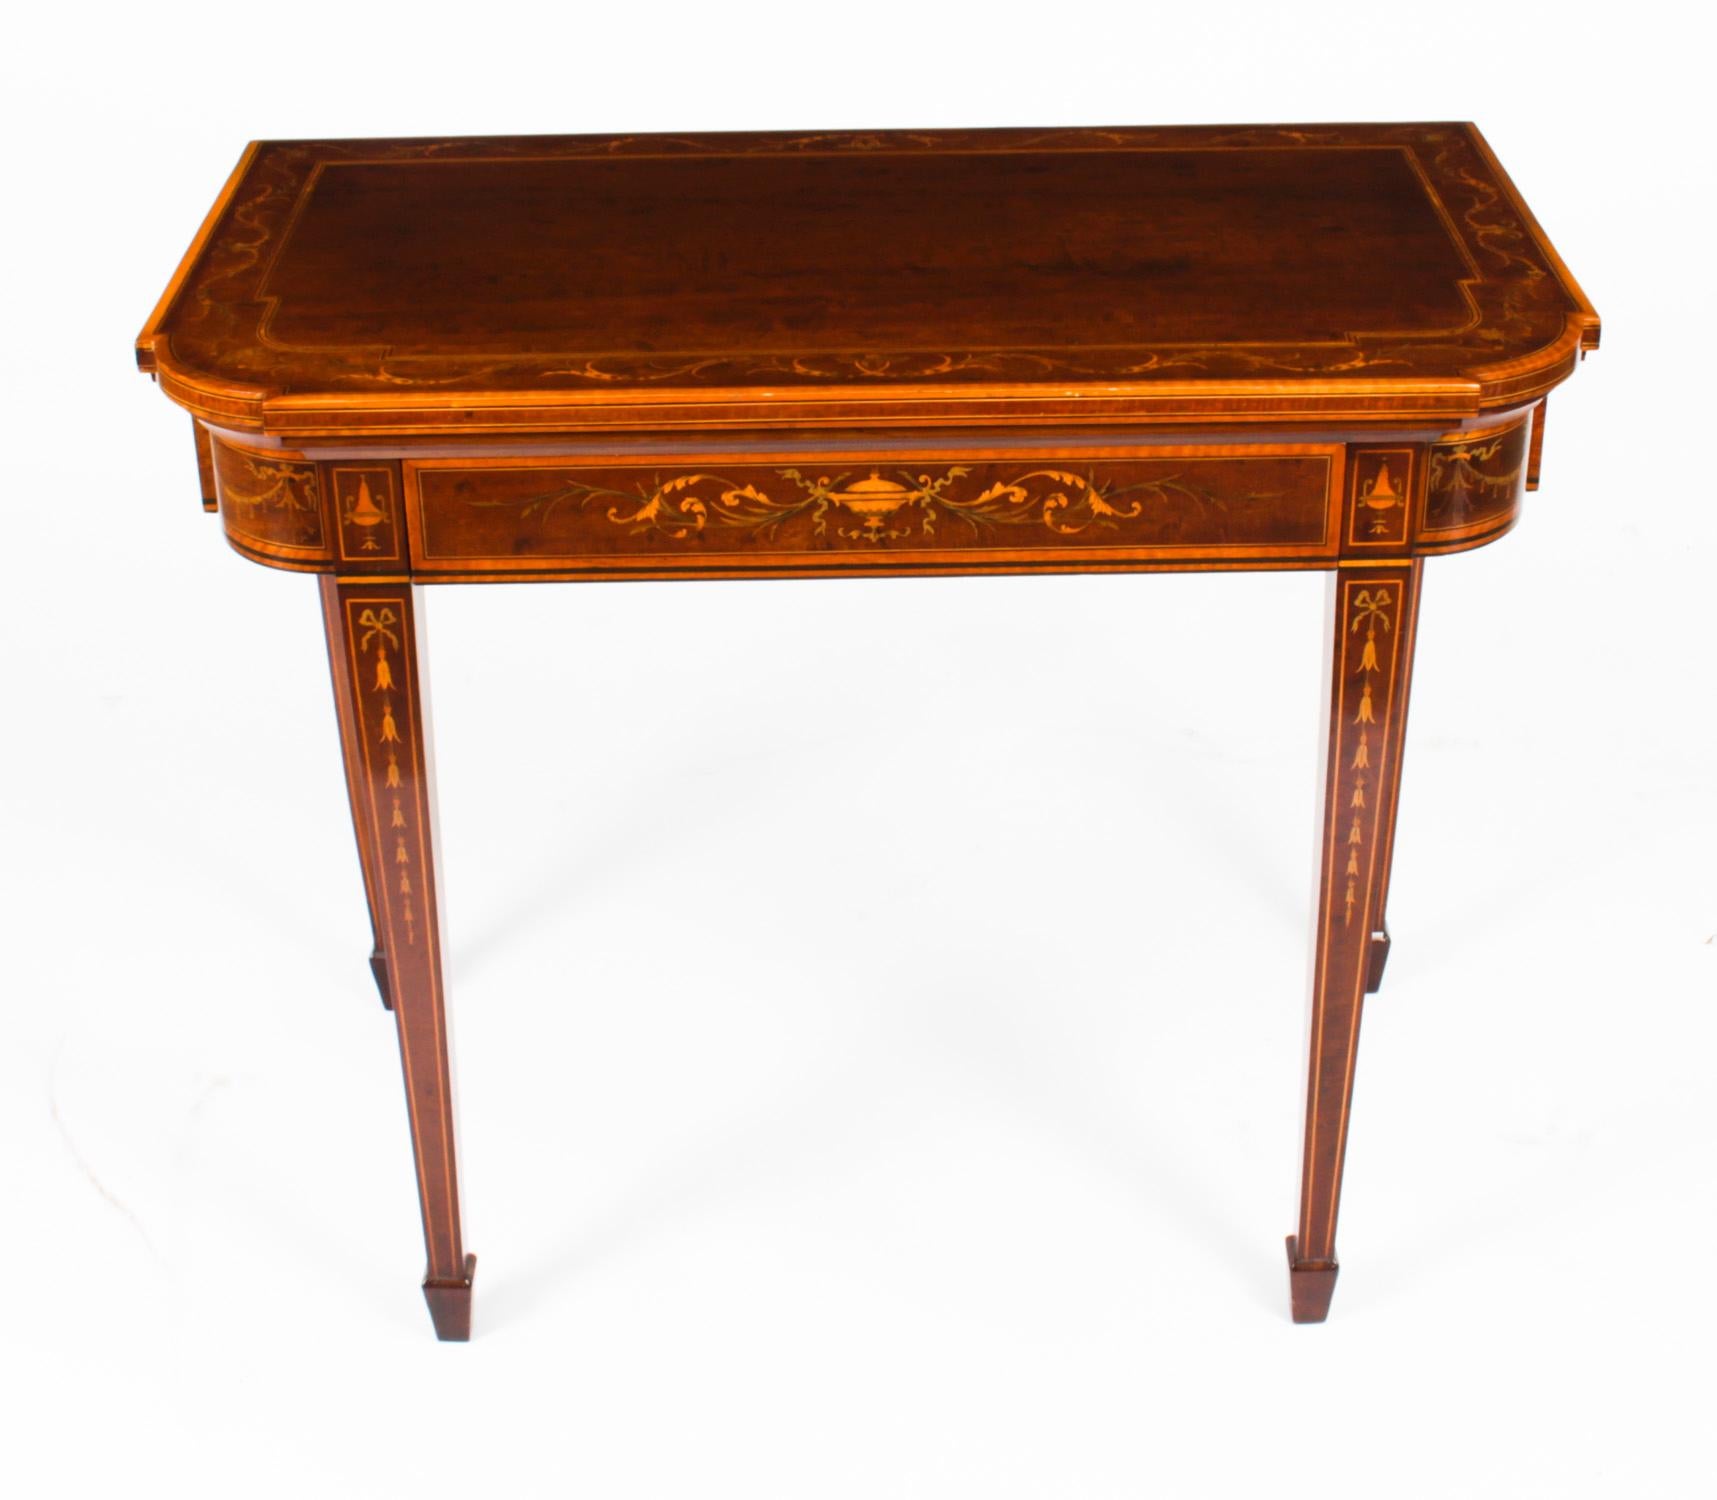 This is a fabulous antique Victorian mahogany, satinwood and marquetry games table in the manner of Edwards & Roberts, circa 1860 in date.

It is made of beautiful flame mahogany and satinwood with elegant satinwood inlaid and penwork floral and